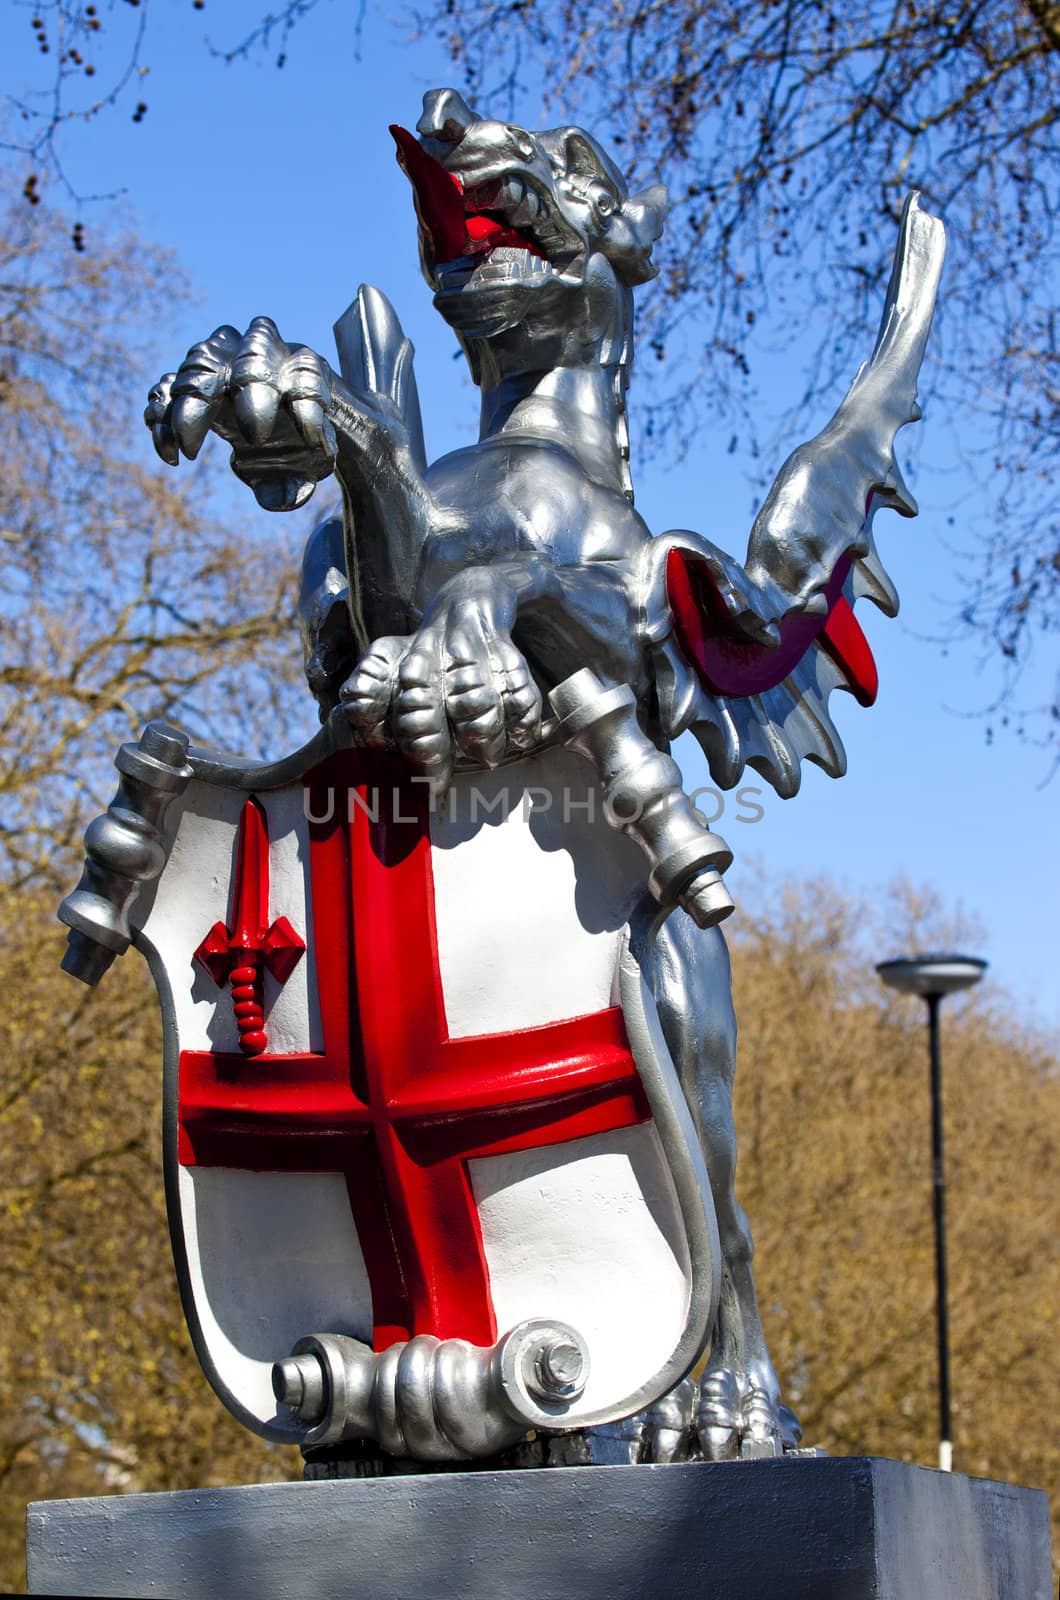 One of the Dragon statues that mark your entry into the City of London.  This one is located along the Victoria Embankment.